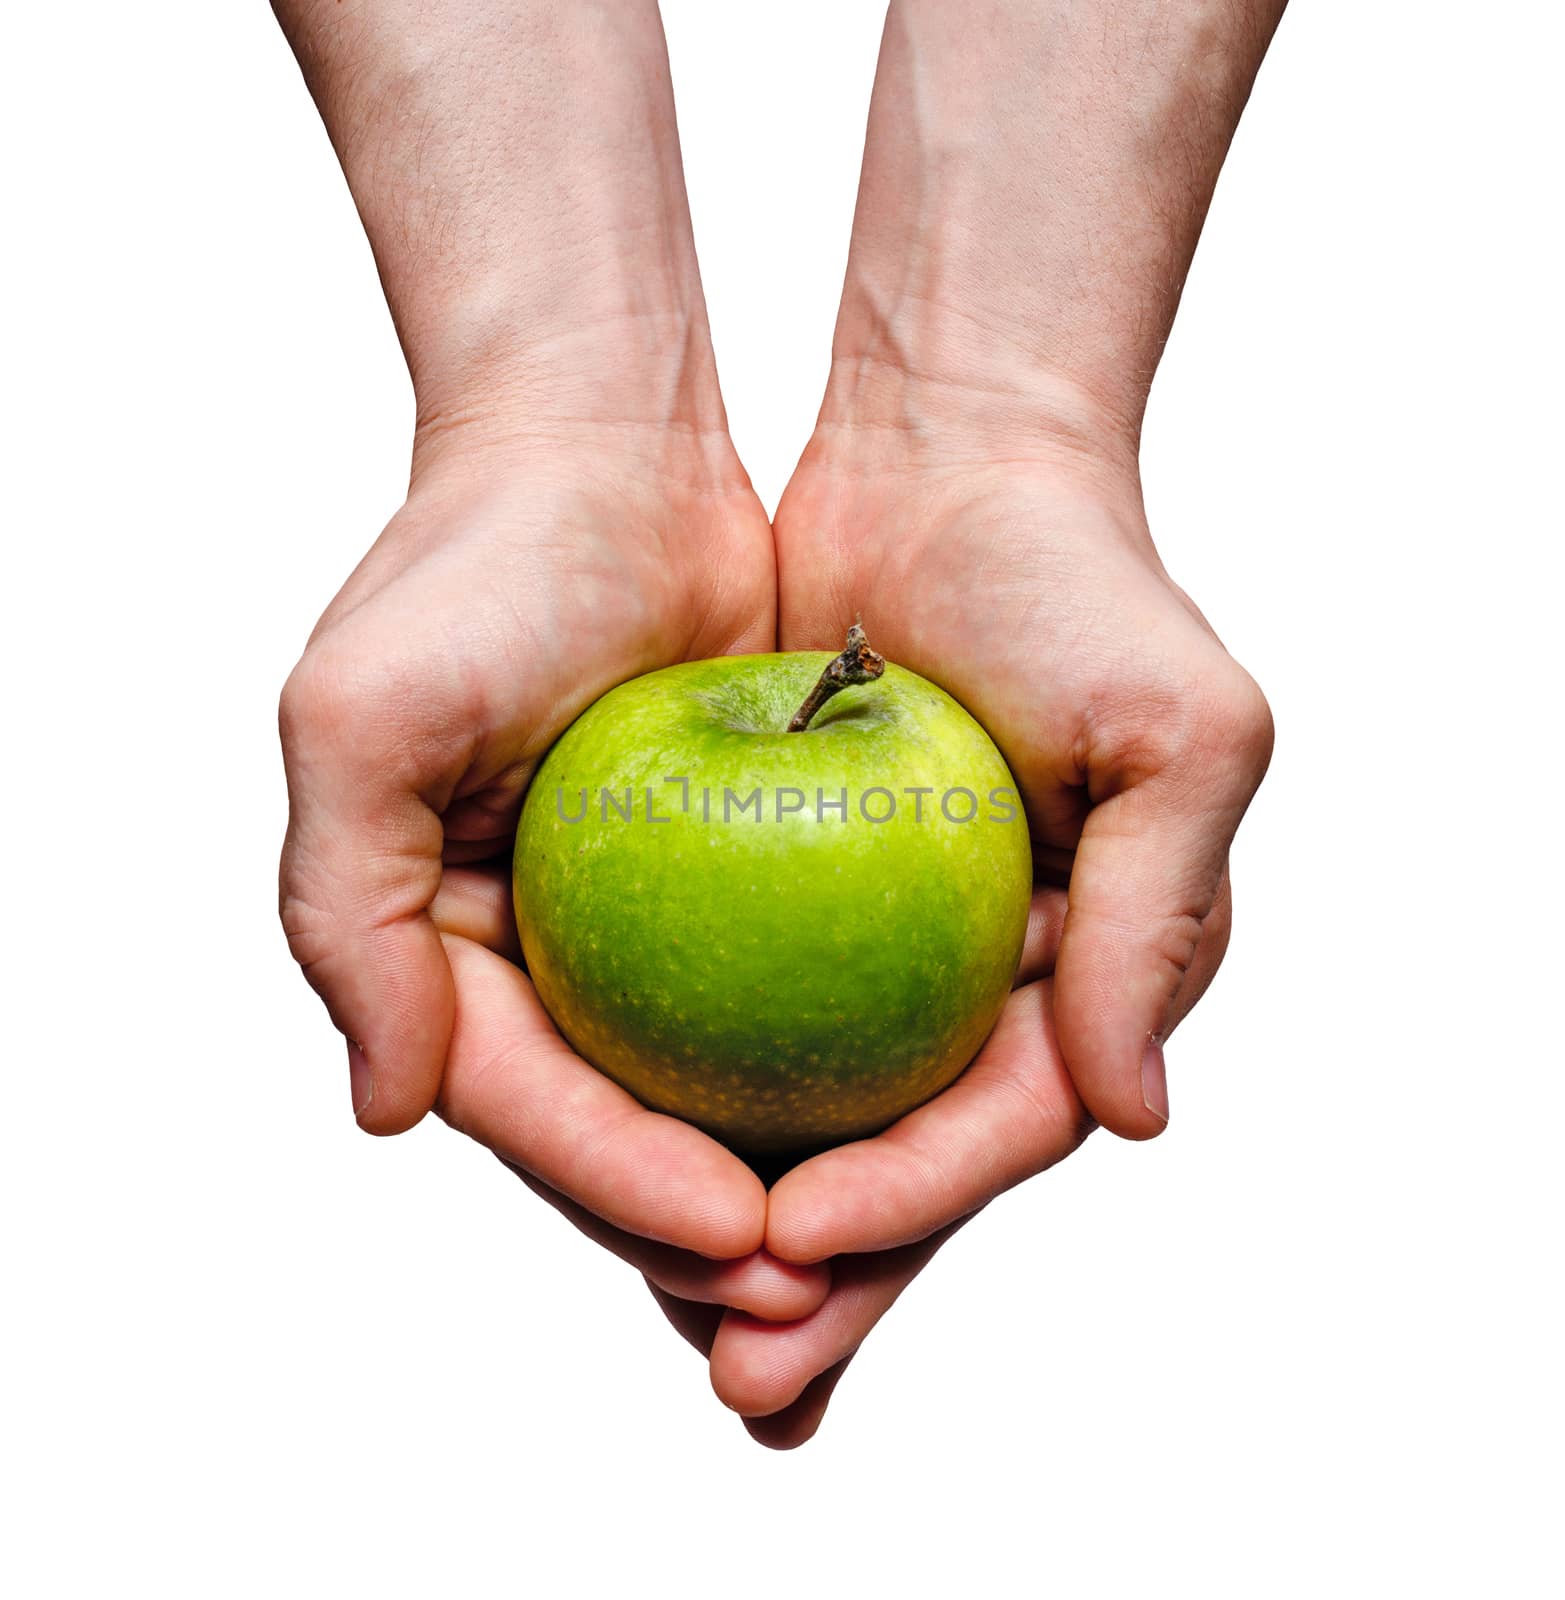 Men's hands holding green apple shot closeup isolated on a white background